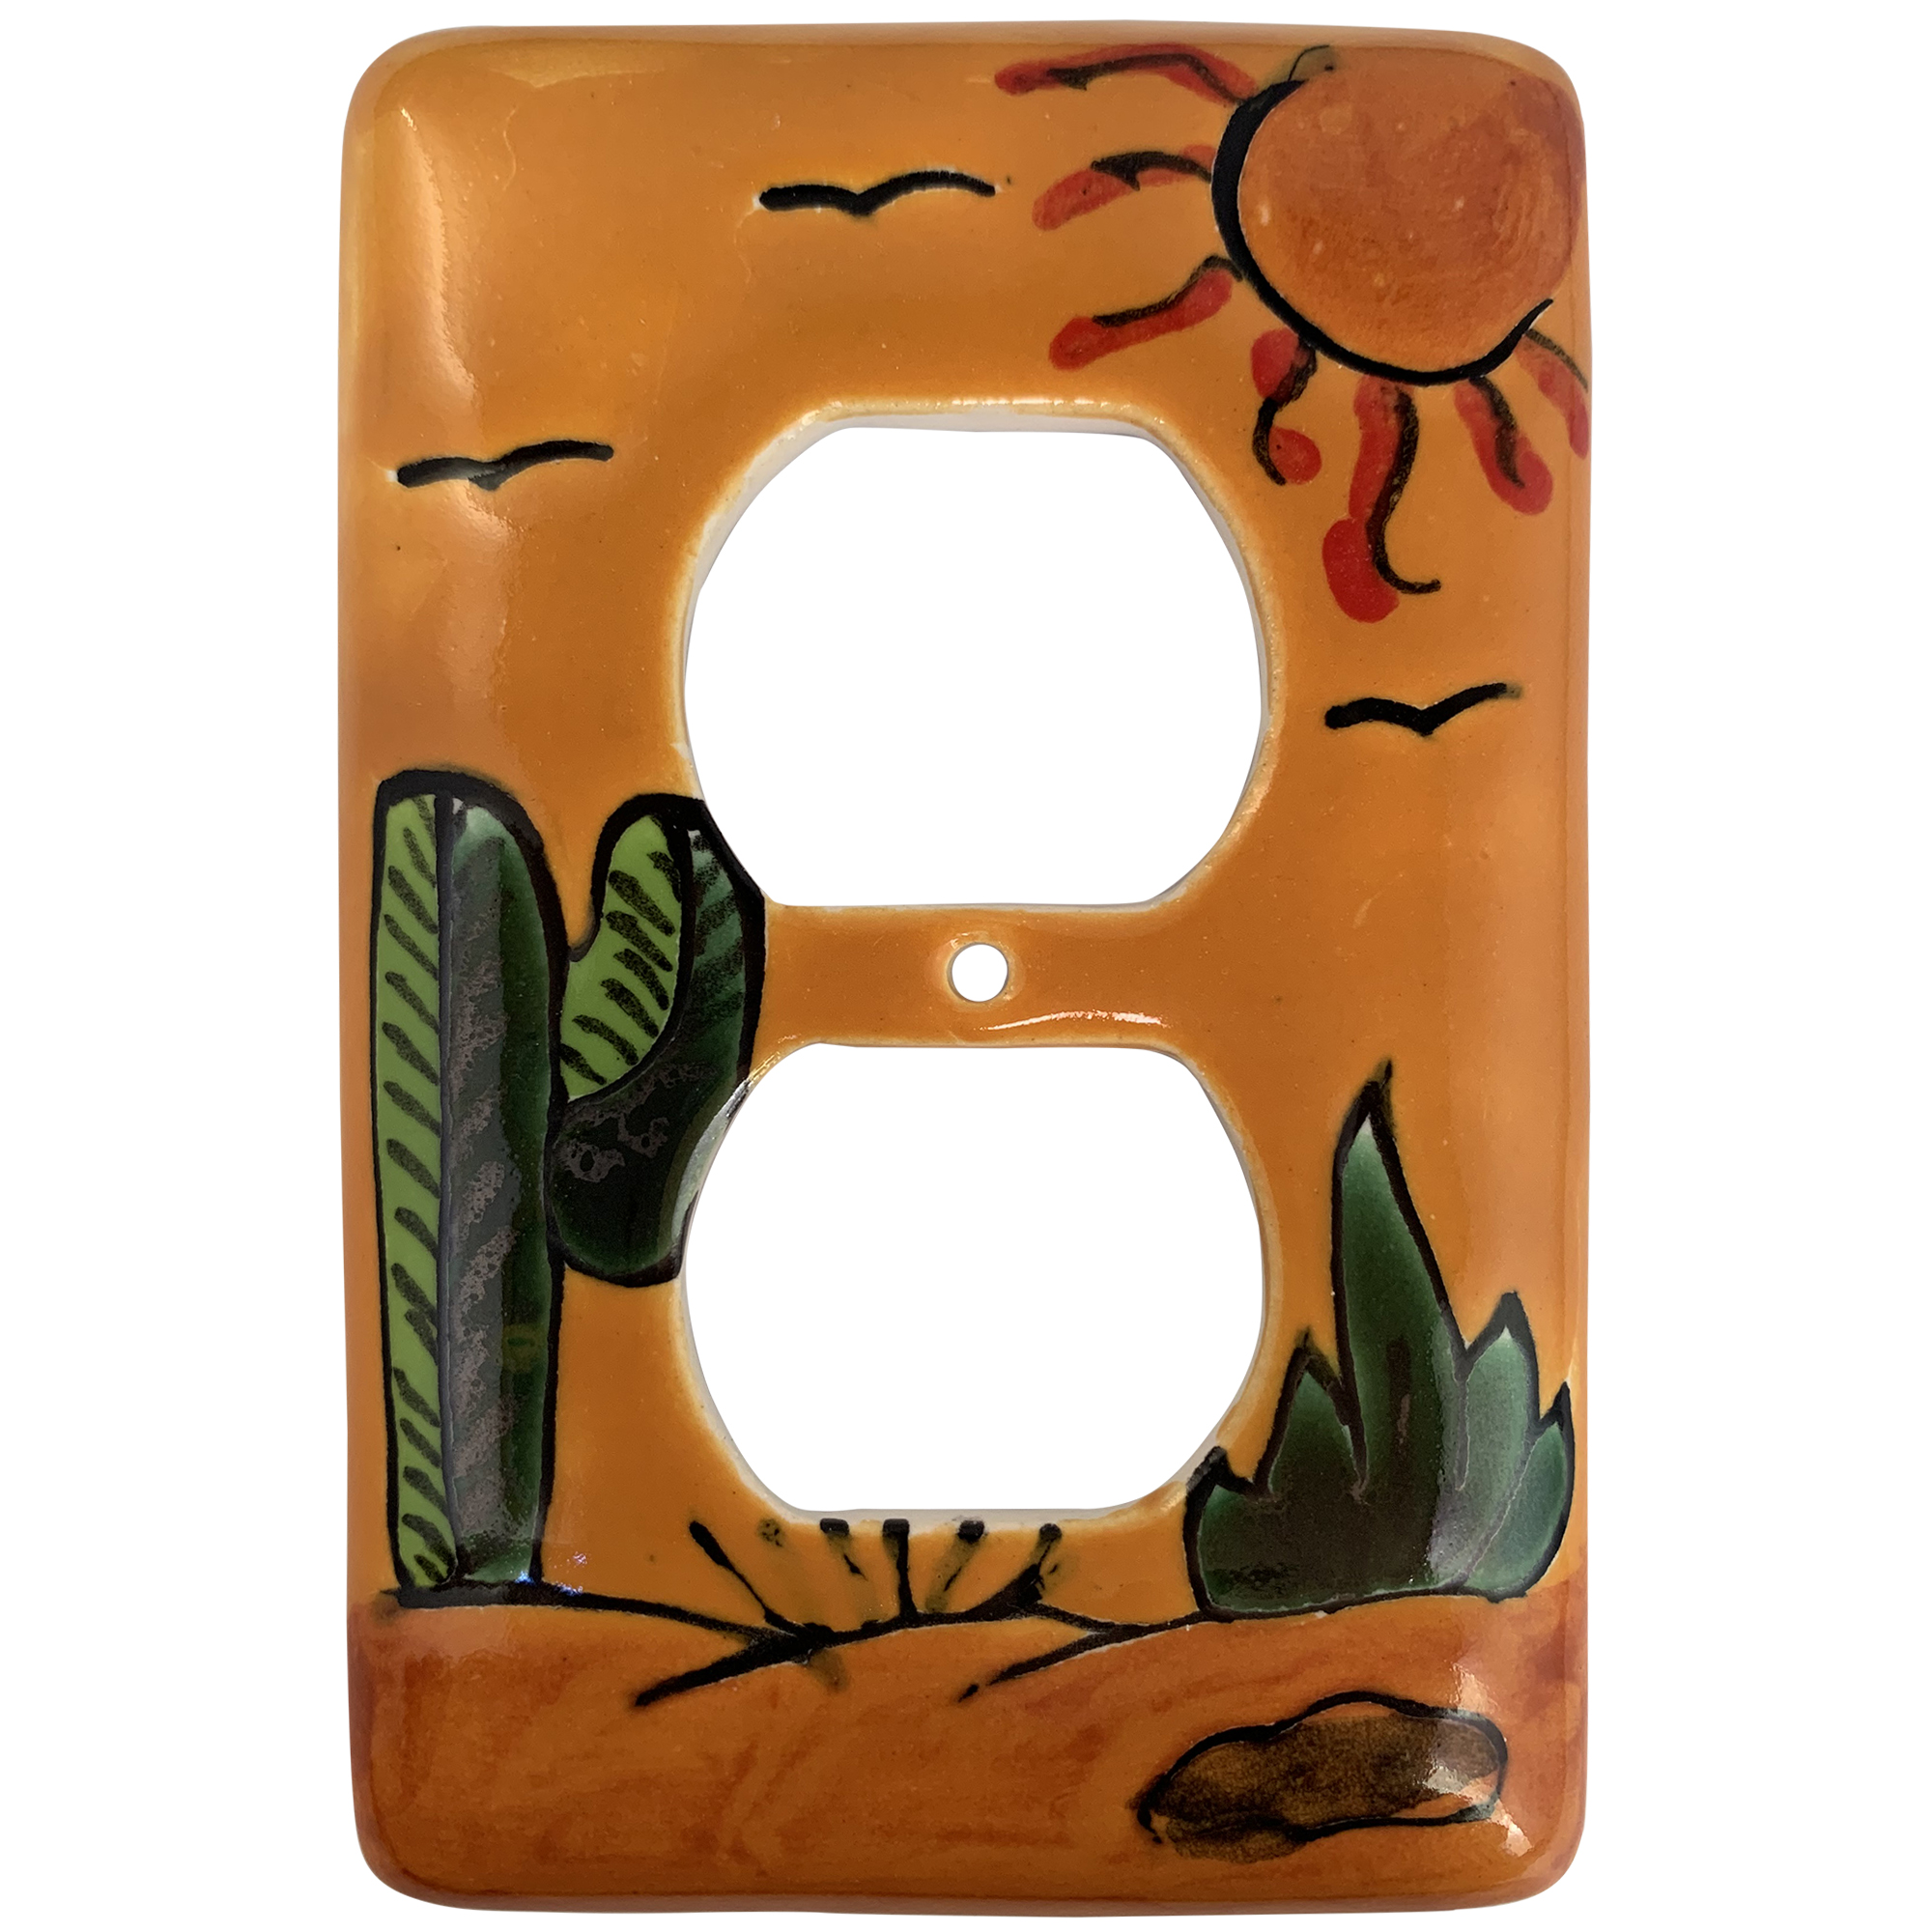 TalaMex Desert Outlet Mexican Talavera Ceramic Switch Plate